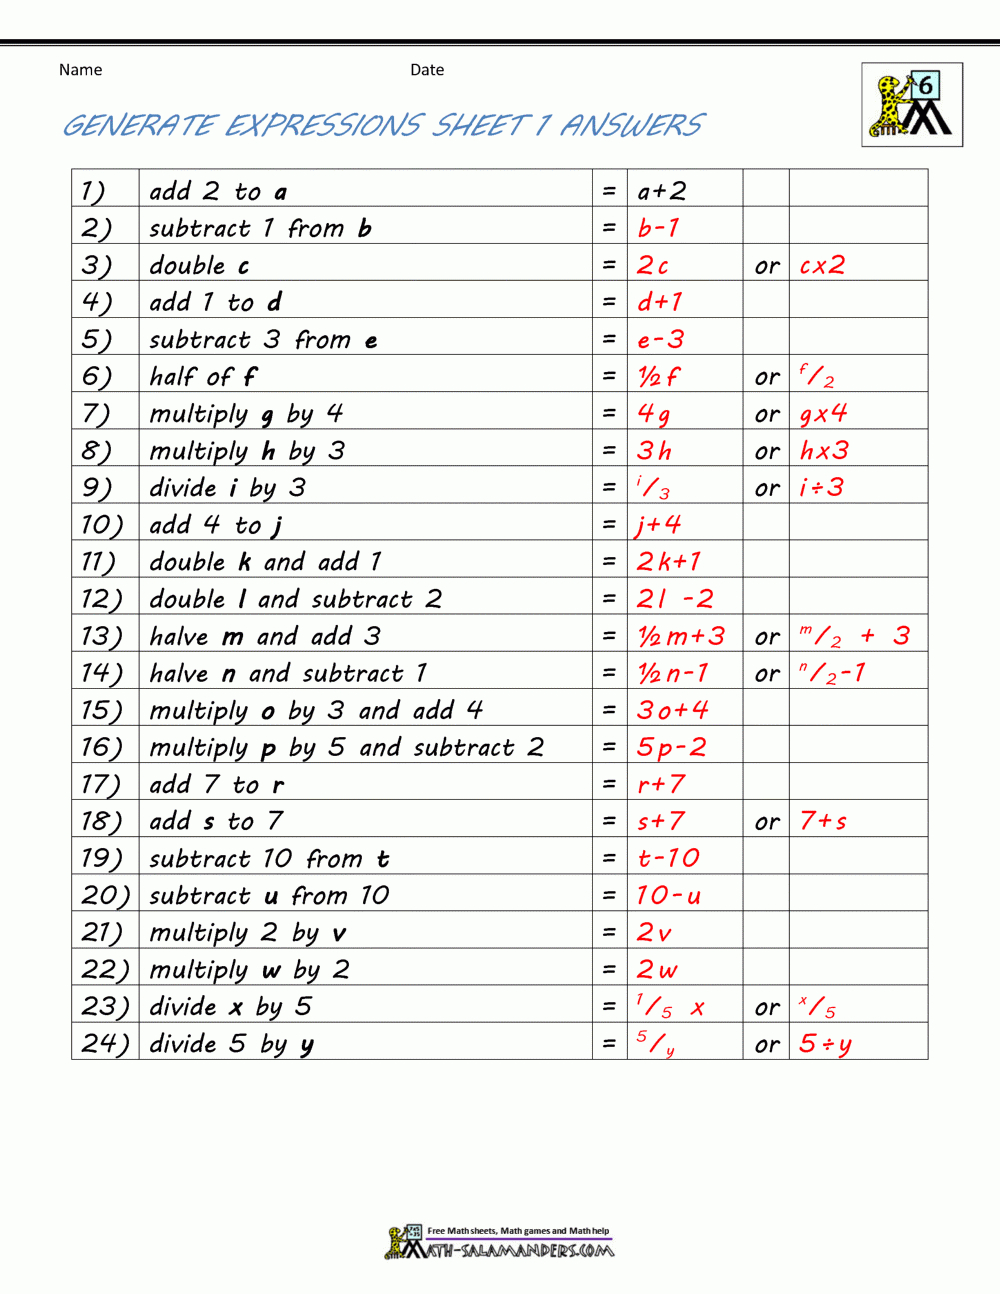 Basic Algebra Worksheets Along With Free Math Worksheets For 7Th Grade With Answers